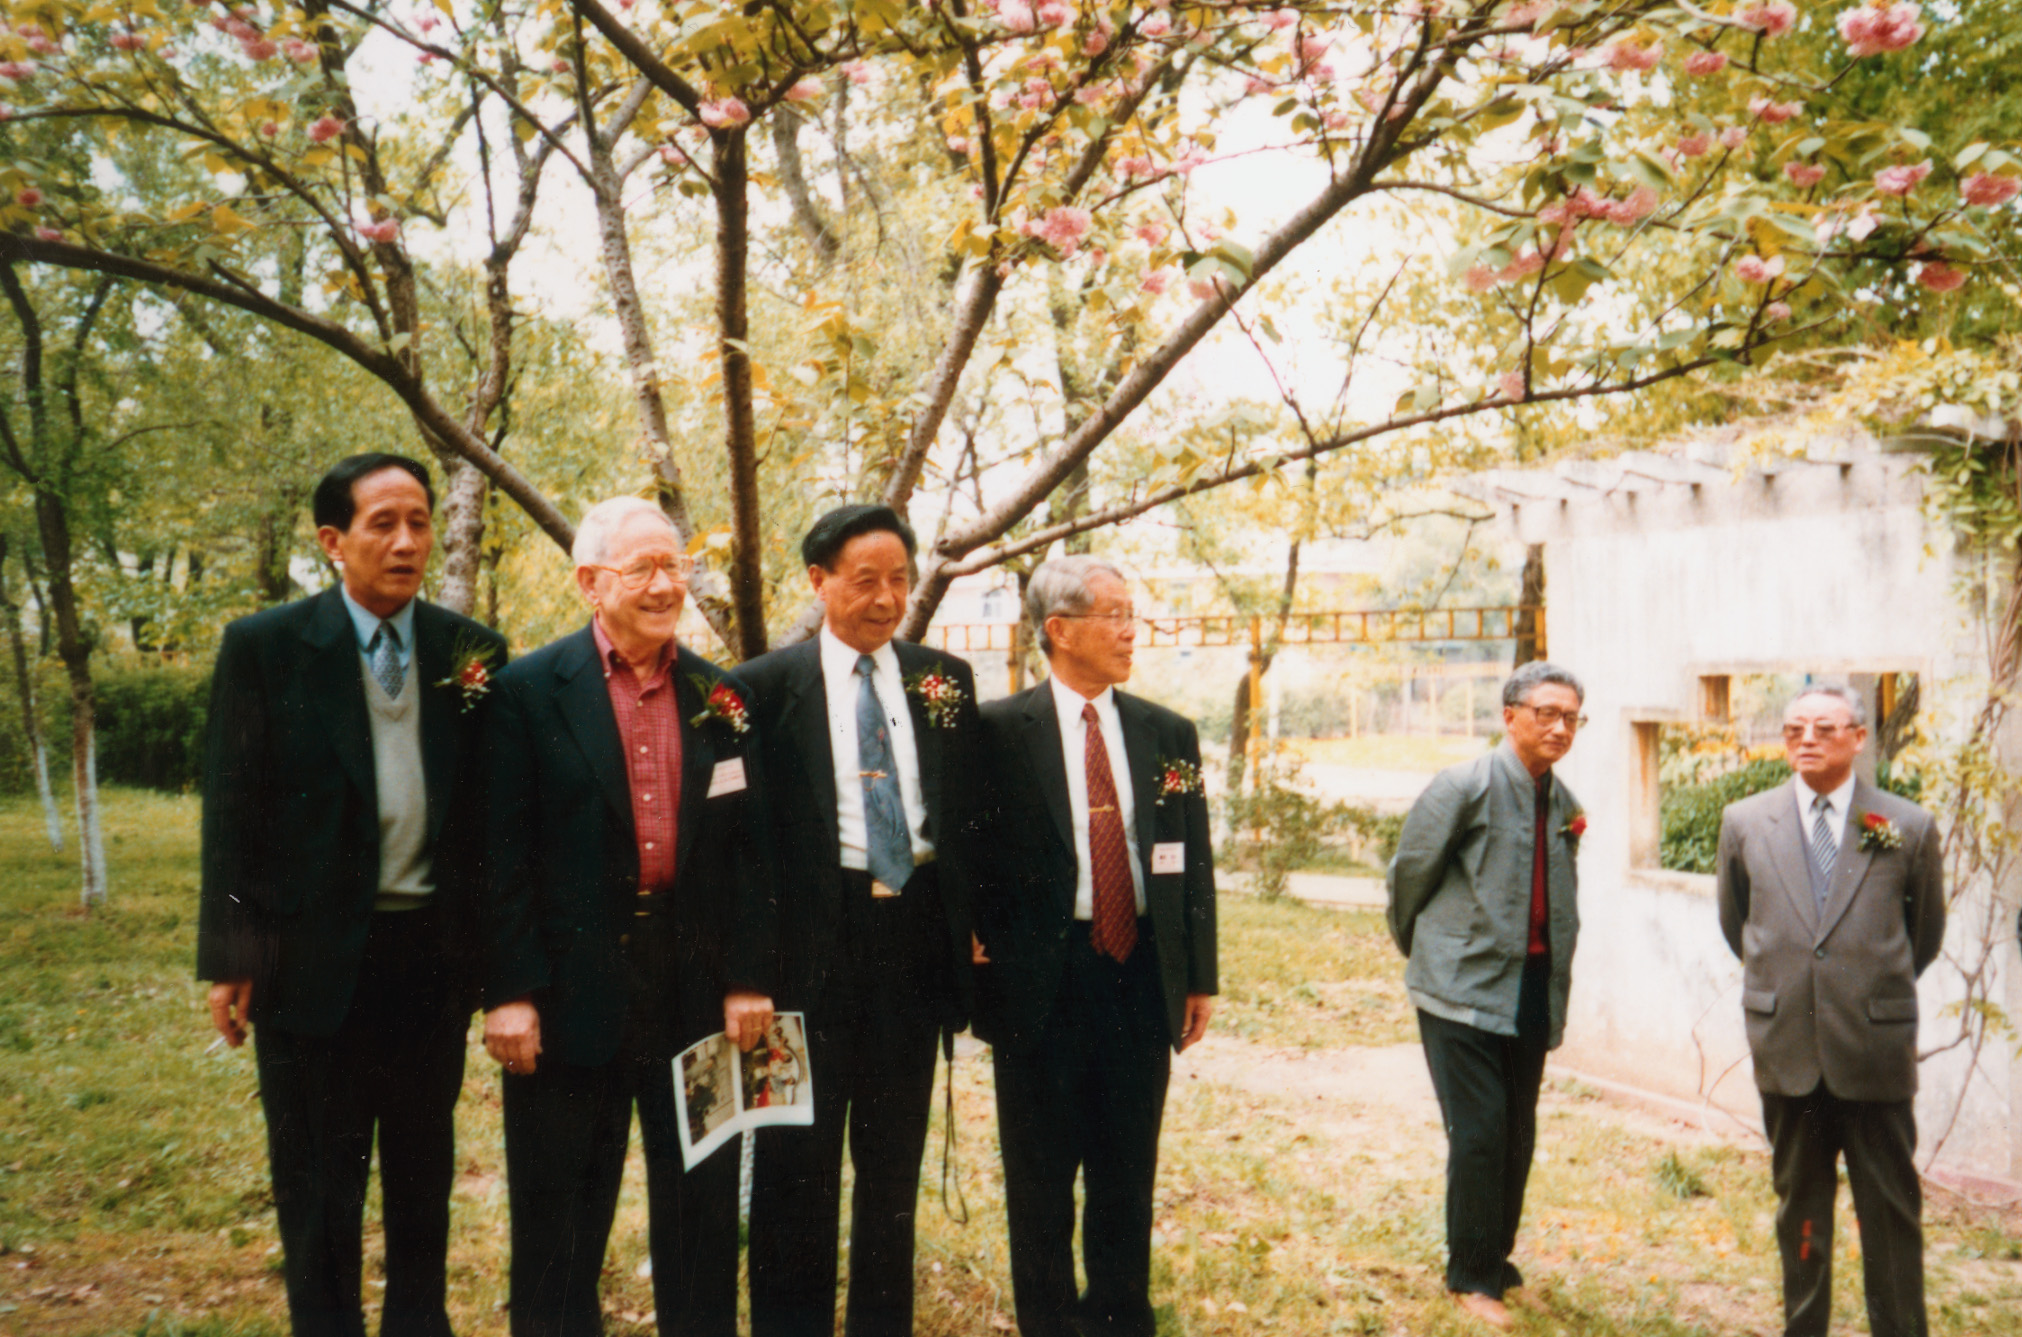 Author Ulrich Straus (second from left) walks with Japanese visitors and their Chinese hosts at the opening of the annual Cherry Blossom Festival in Nanking.